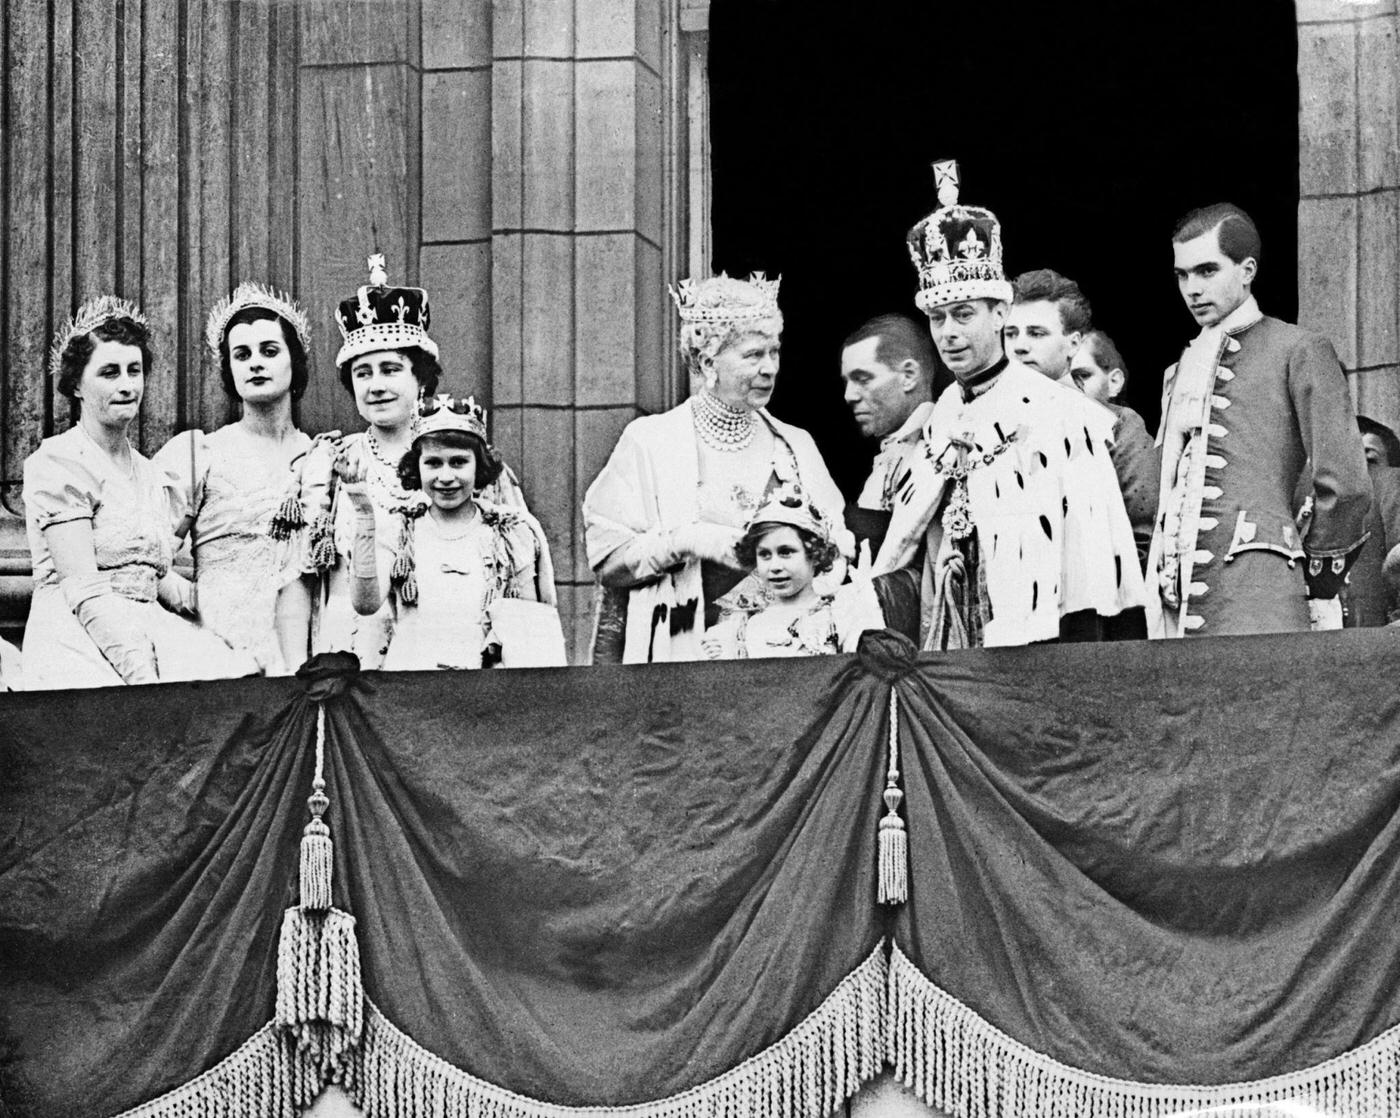 The Queen Elizabeth, with her daughter Princess Elizabeth, Queen Mary, Princess Margaret and King George VI pose at the balcony of the Buckingham Palace.